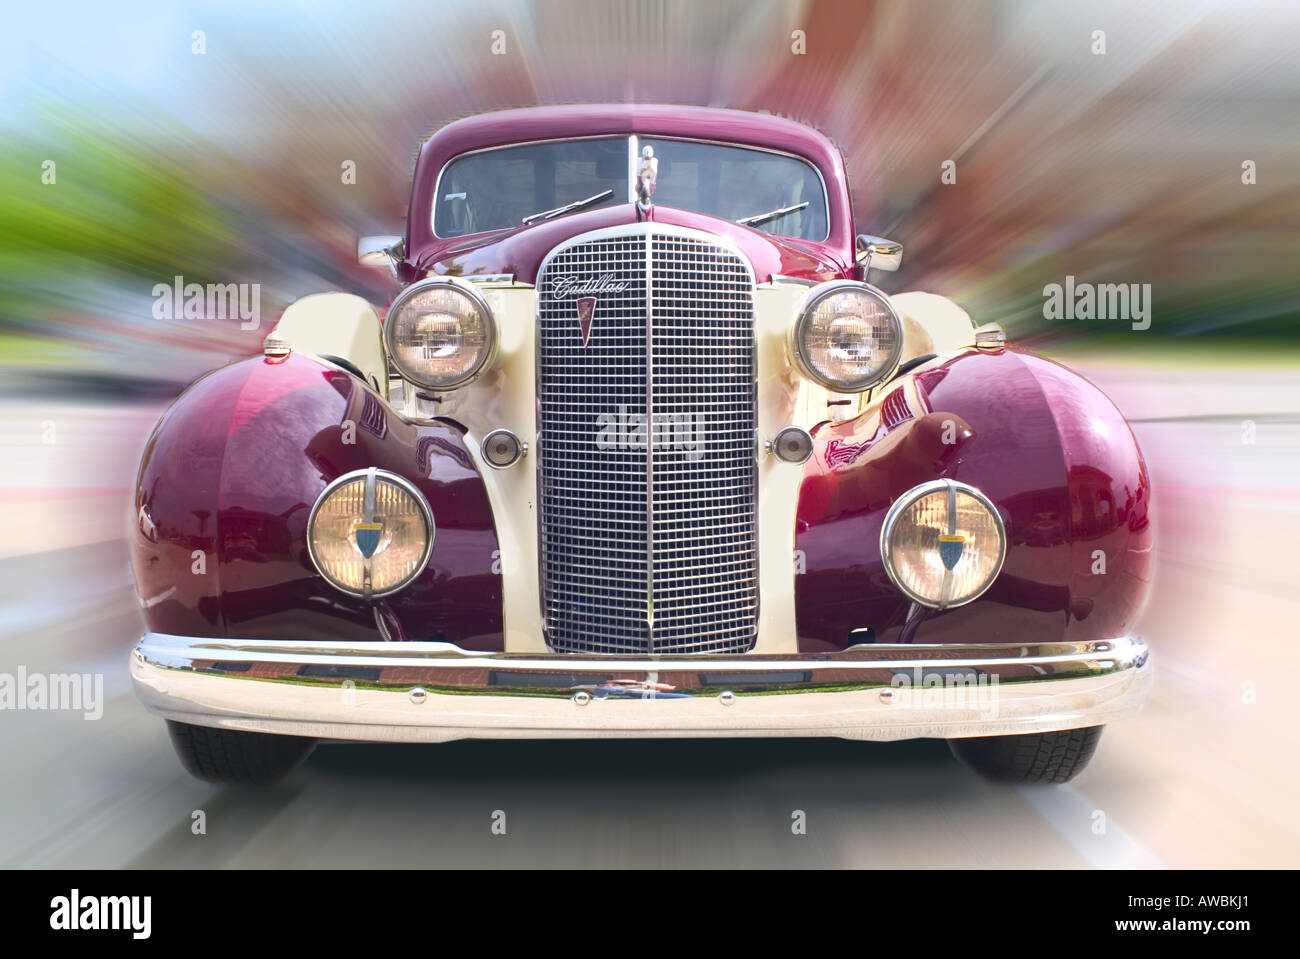 Front view of a 1937 Cadillac in motion Stock Photo